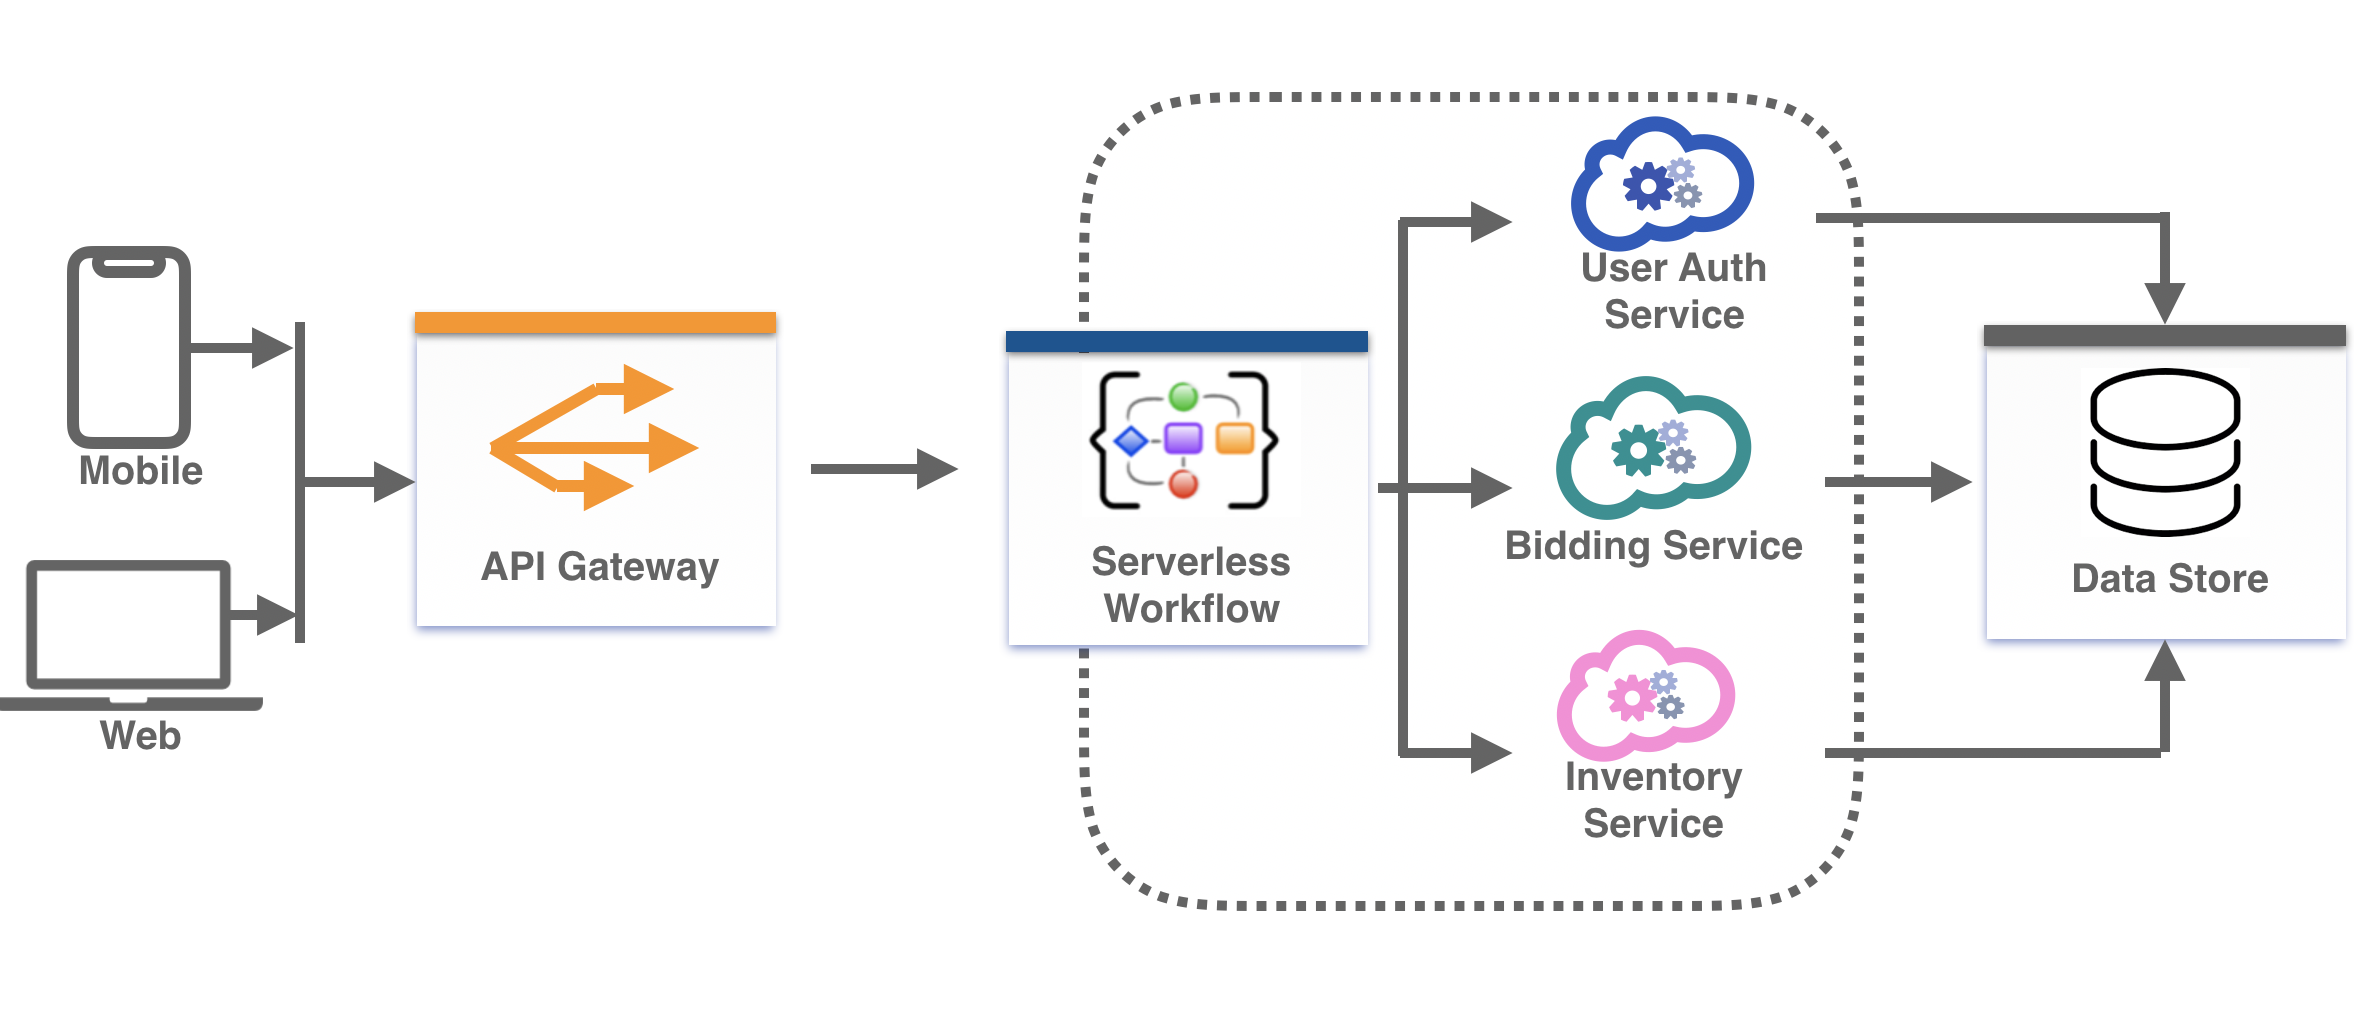 Image of Serverless Workflow orchestration for online vehicle auction